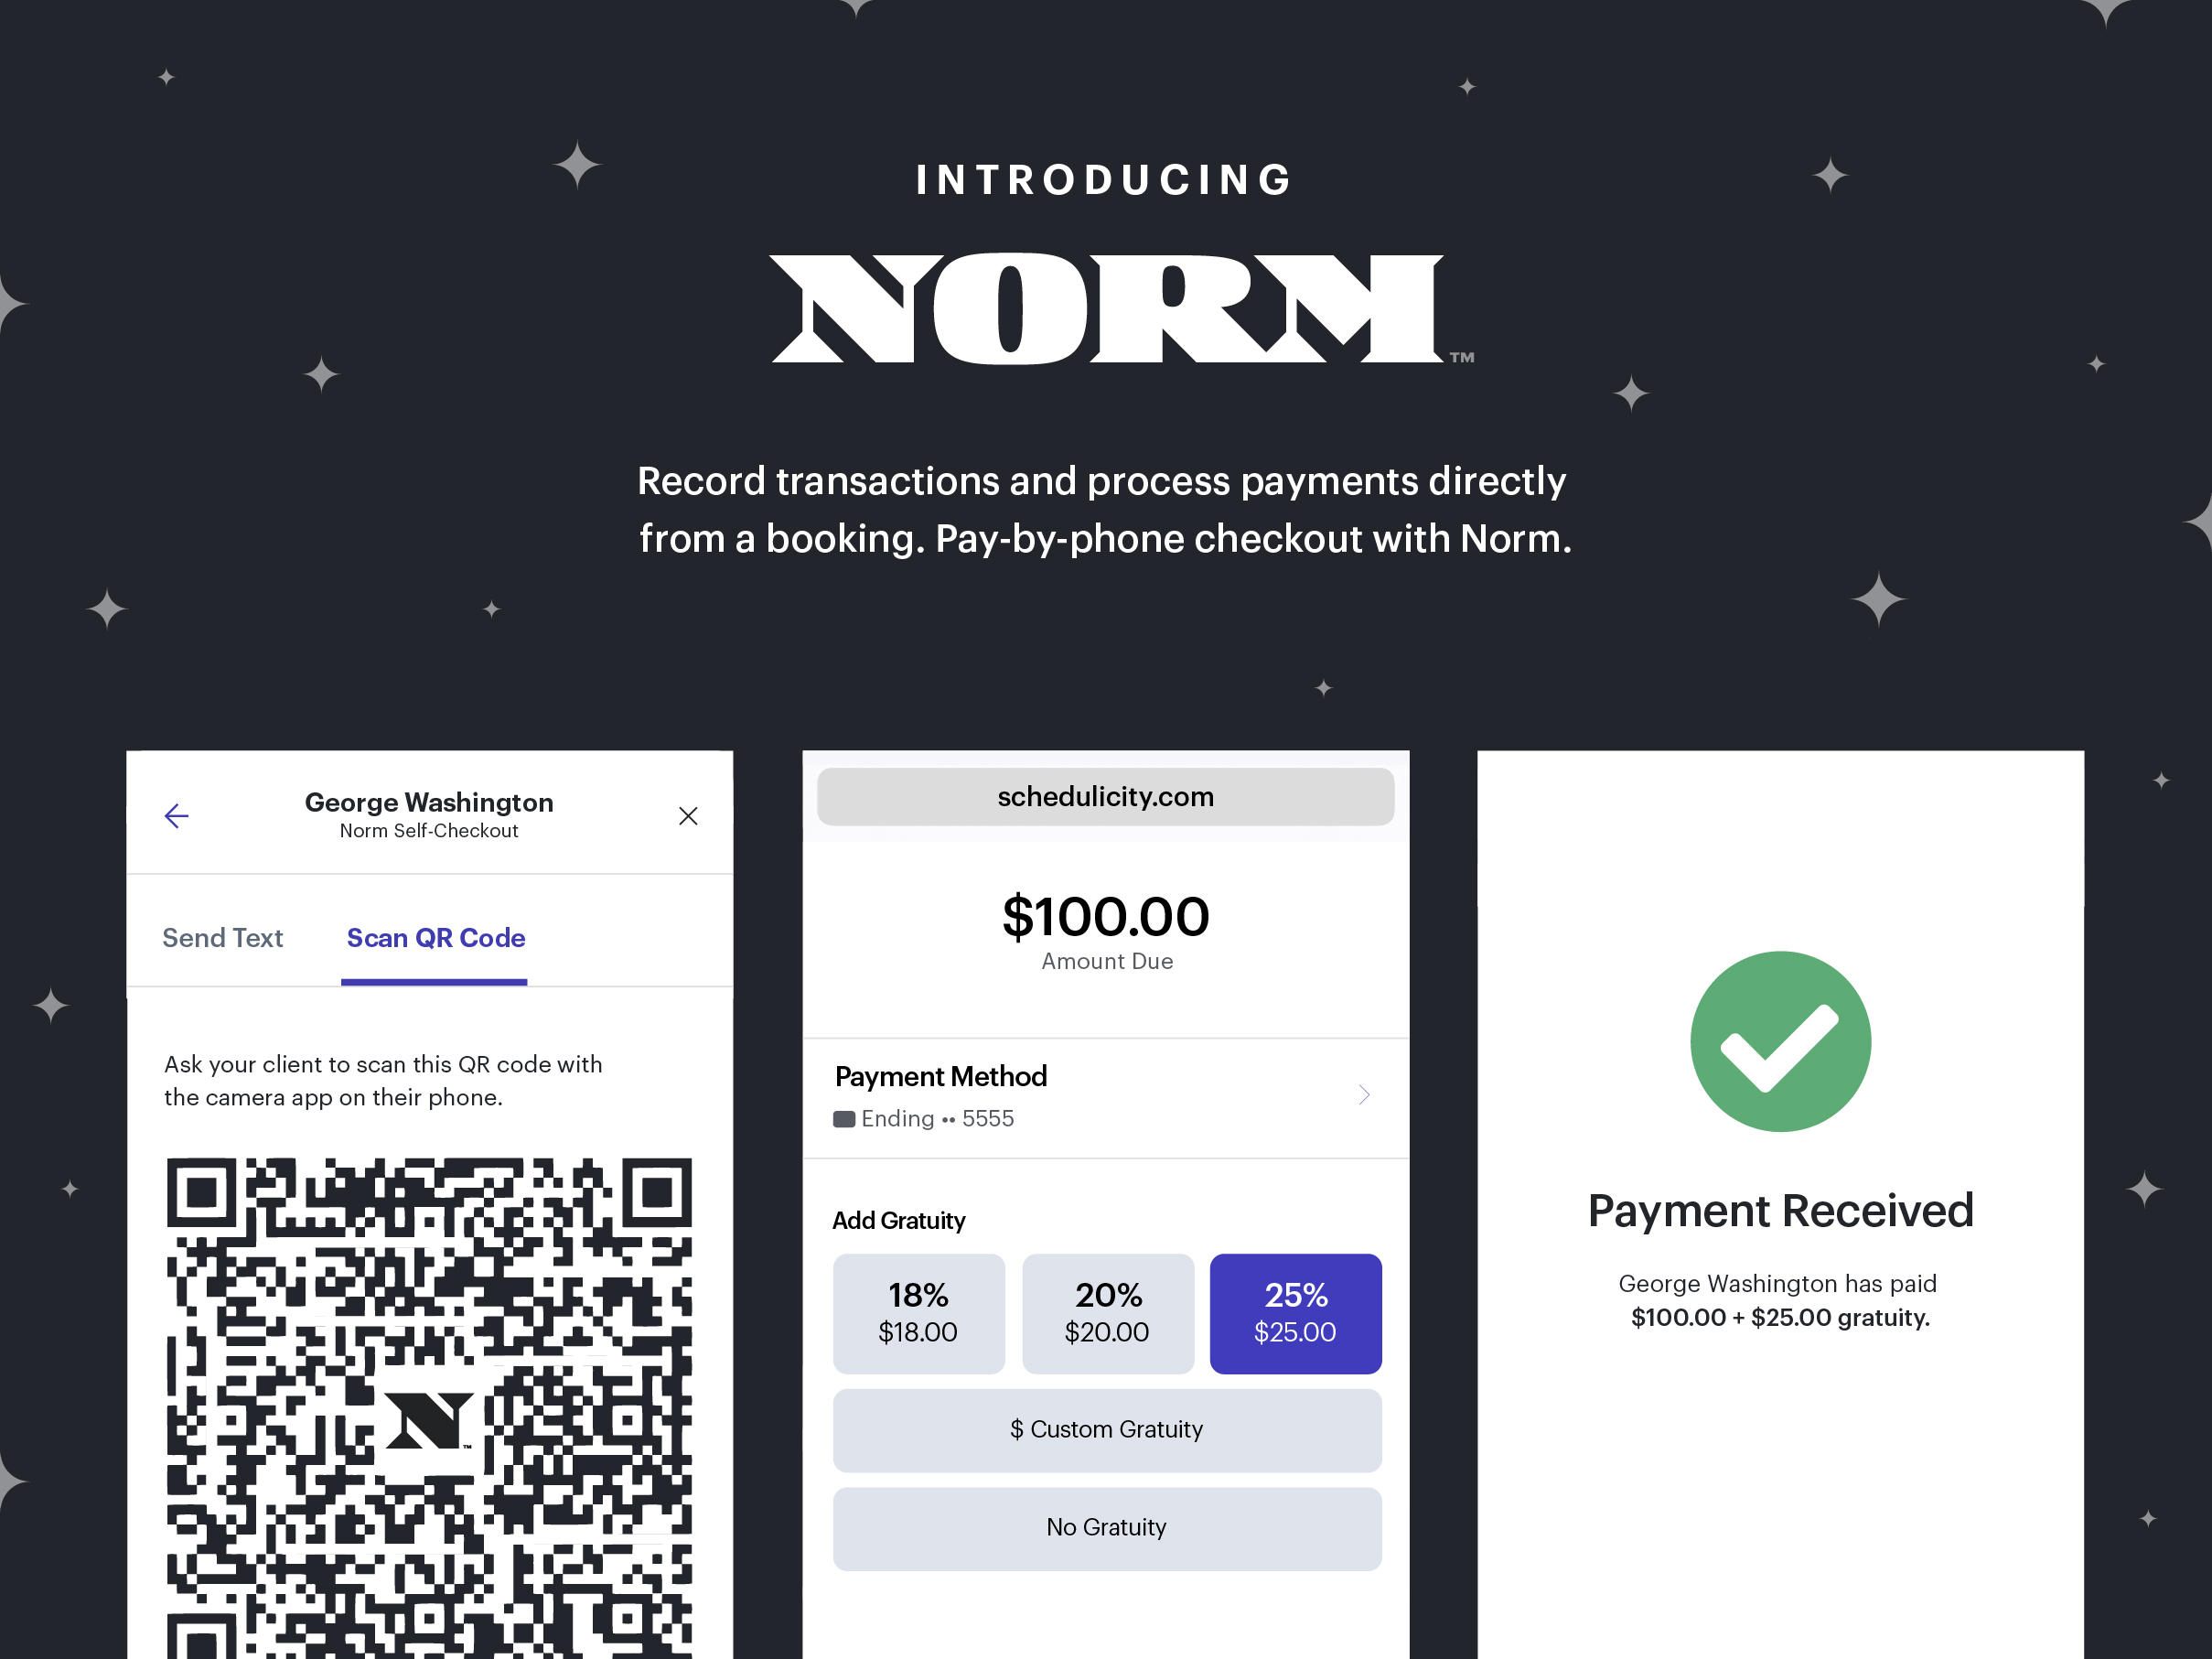 Introducing Norm: Record transactions and process payments directly from a booking. Pay-by-phone checkout with Norm.